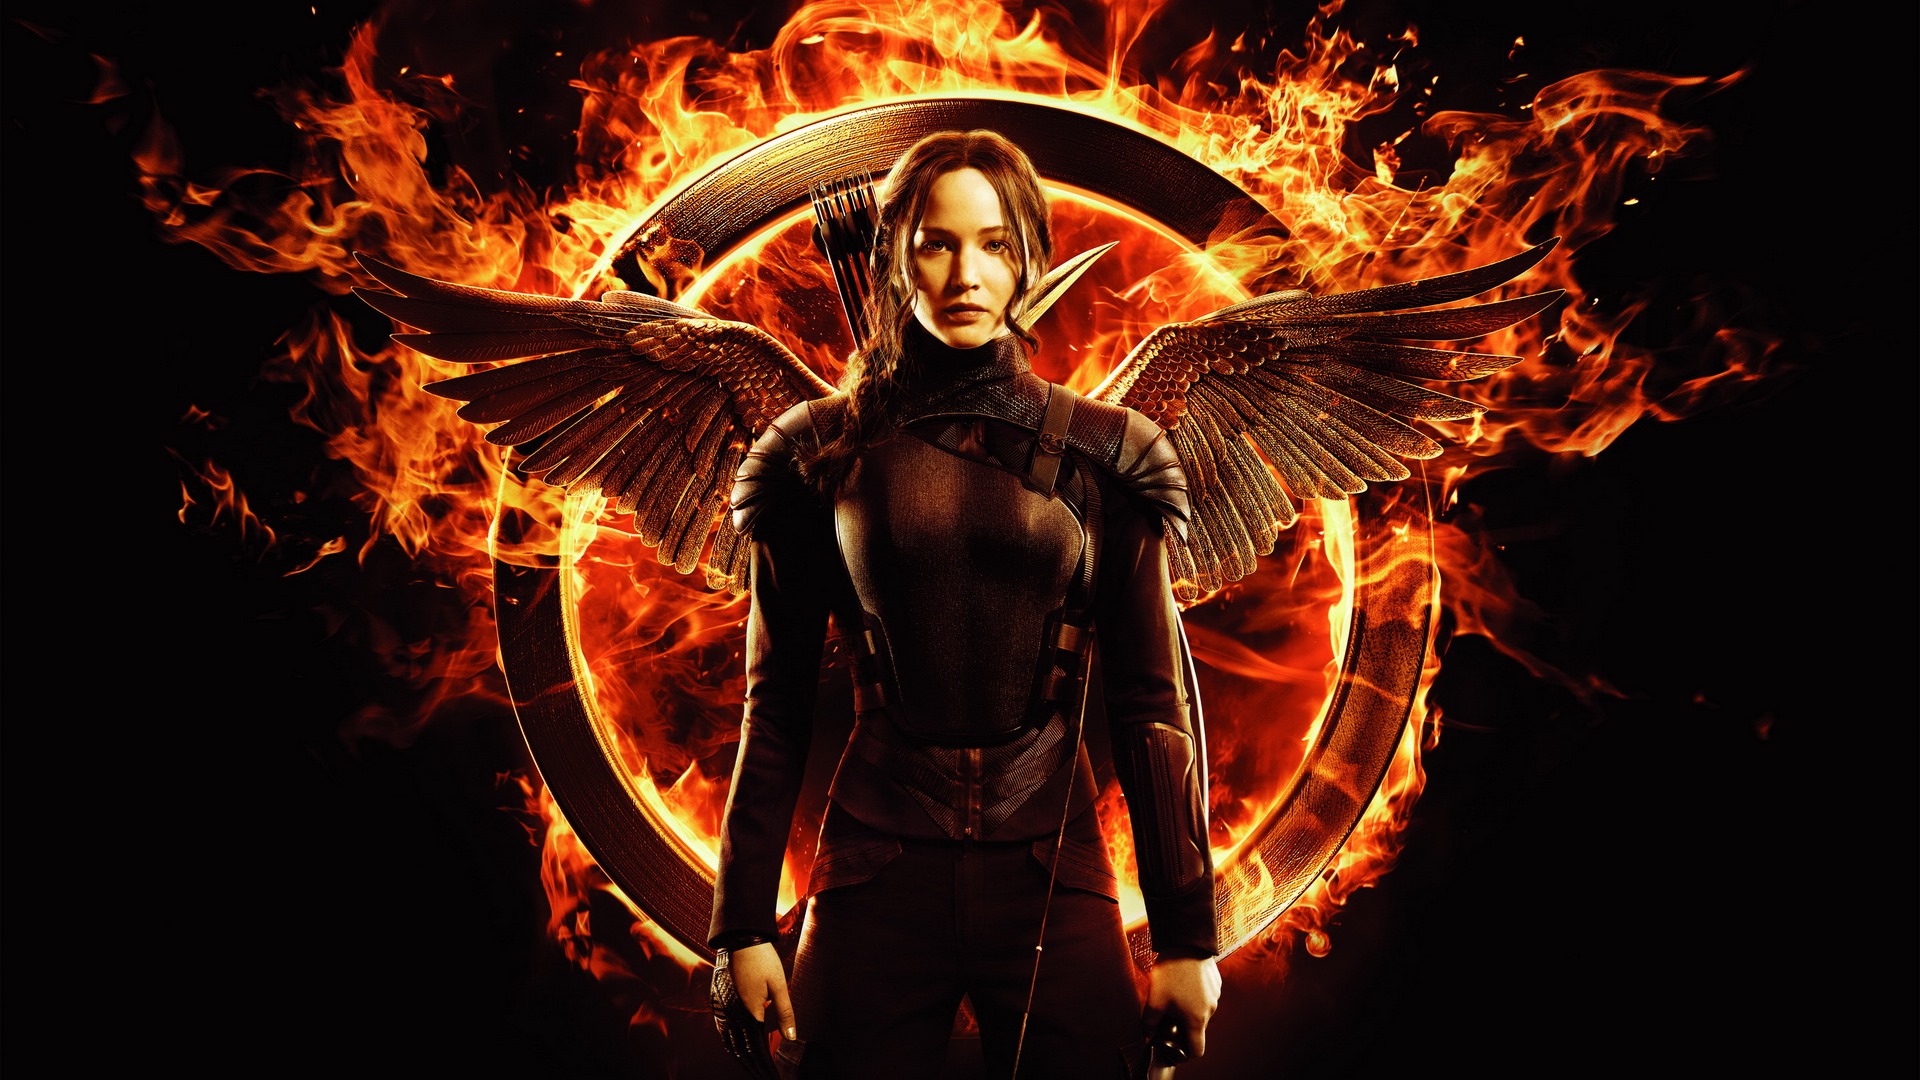 The Hunger Games: Mockingjay HD wallpapers #10 - 1920x1080